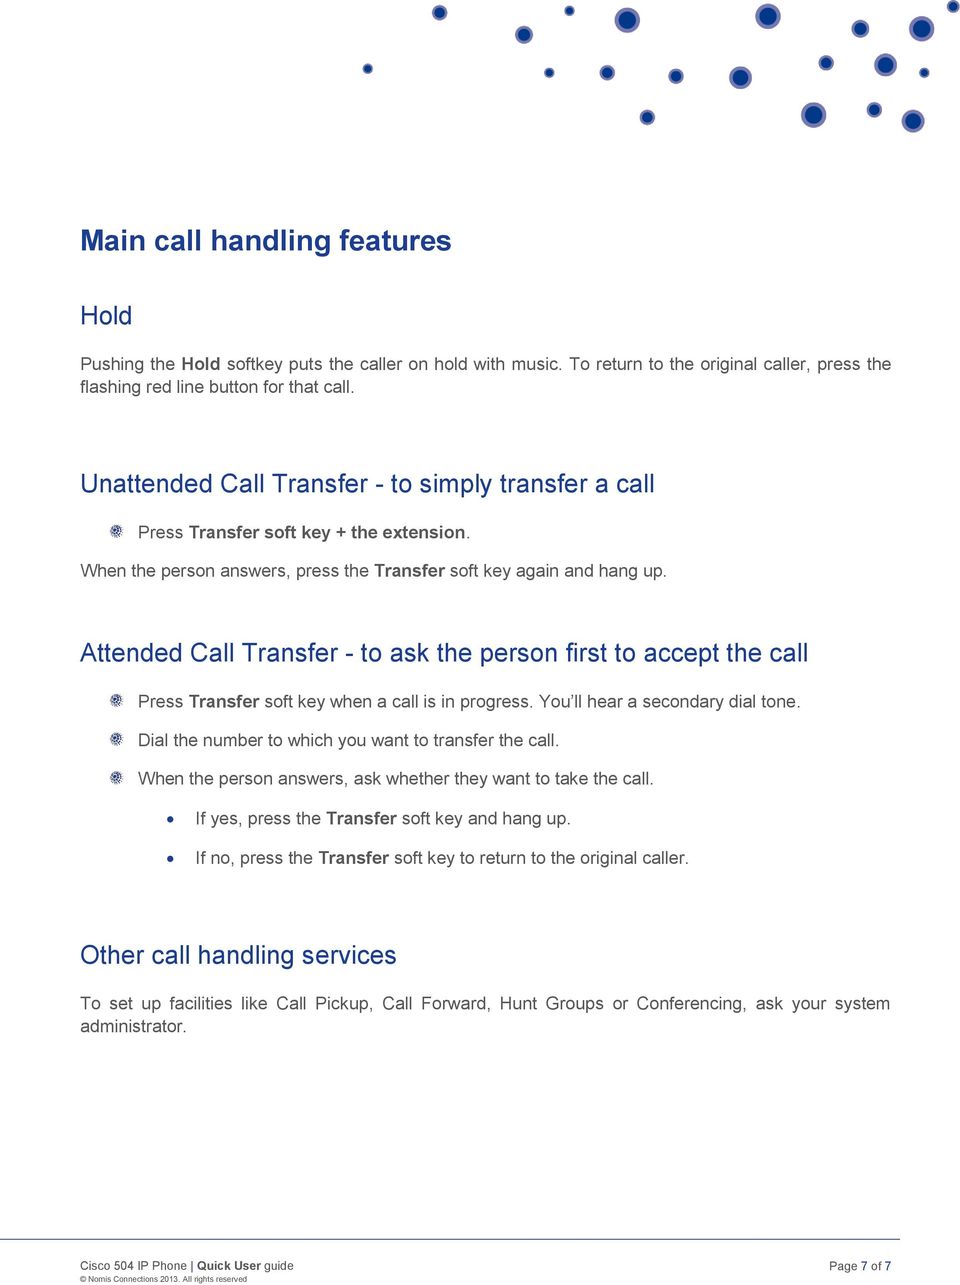 Attended Call Transfer - to ask the person first to accept the call Press Transfer soft key when a call is in progress. You ll hear a secondary dial tone.